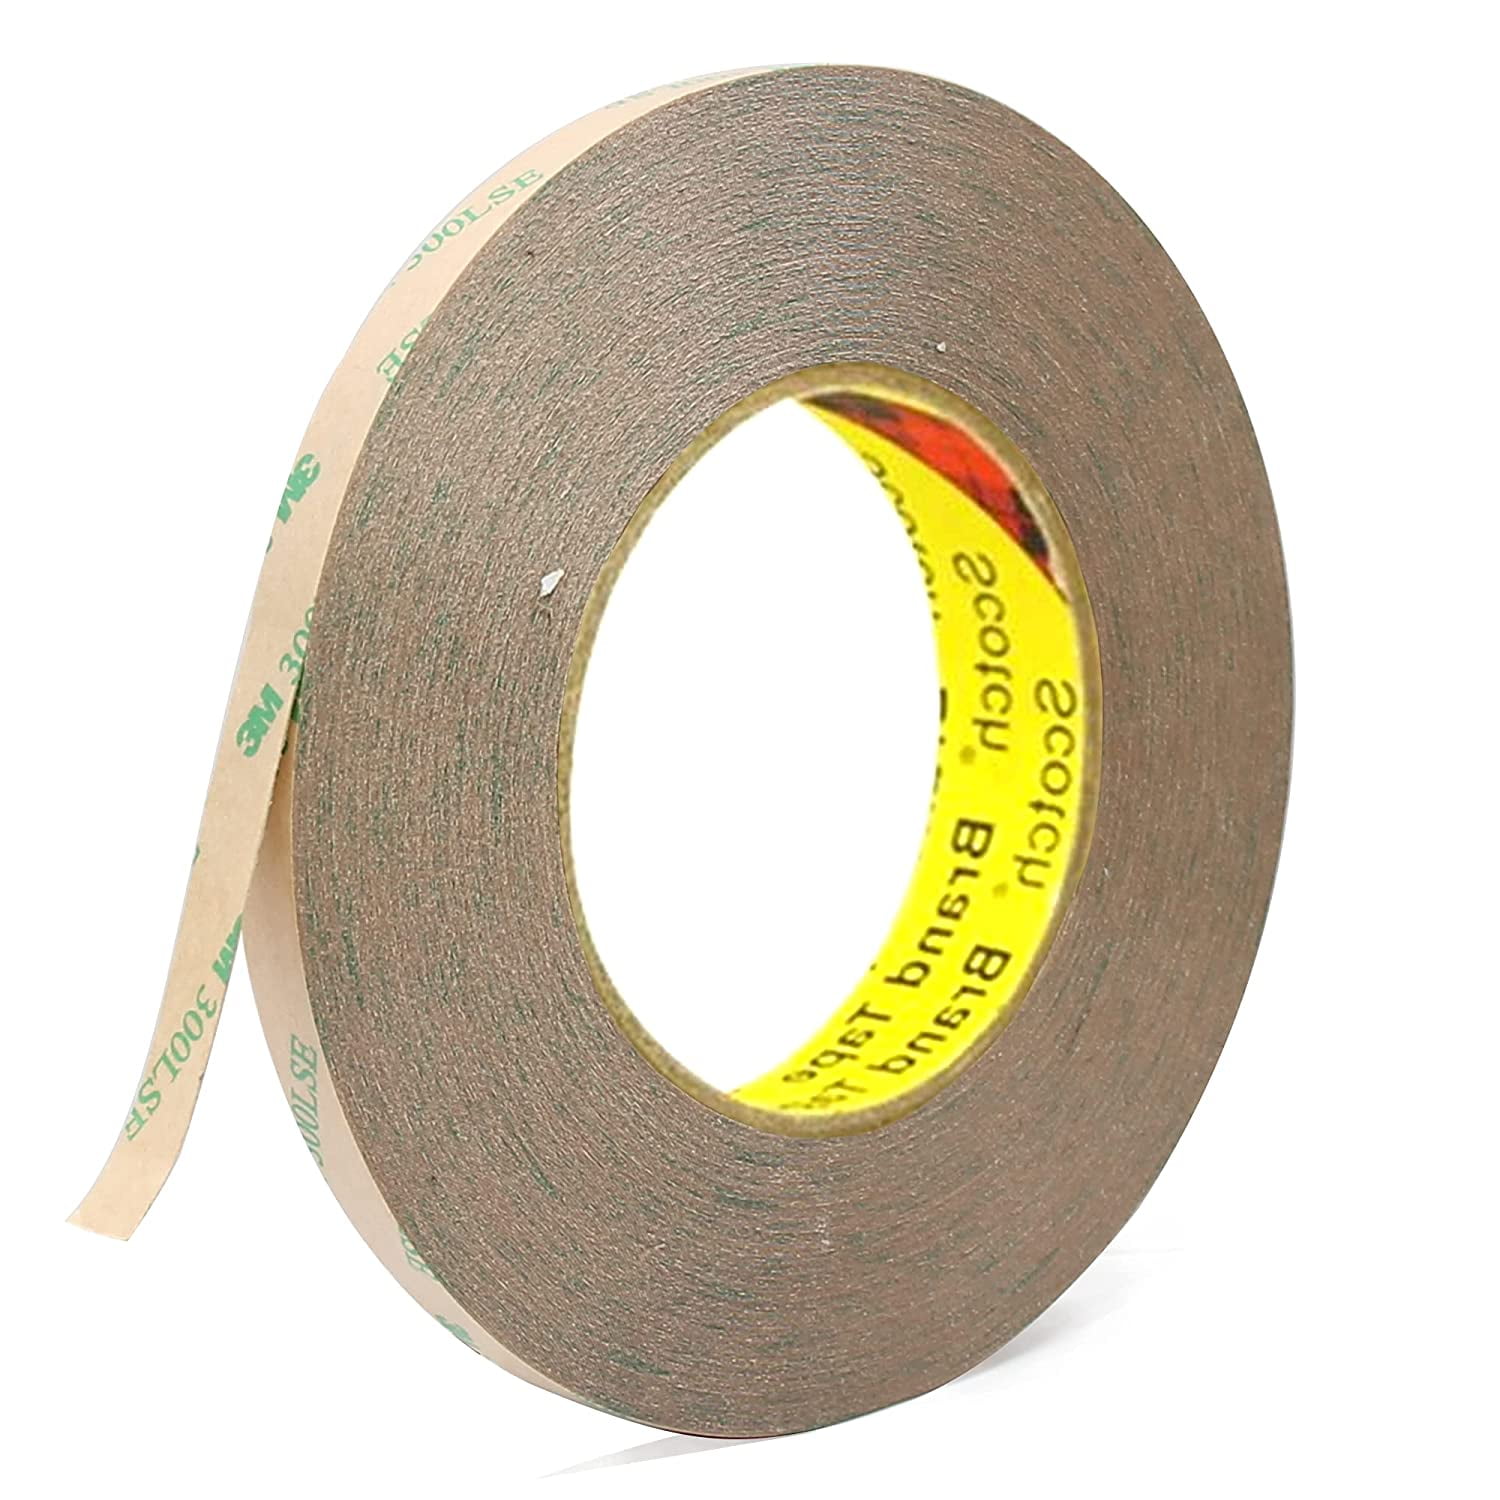 Clear 3M Double Sided VHB TAPE ~ 10mm wide x 1mm thick ~ MOUNTING Self  Adhesive